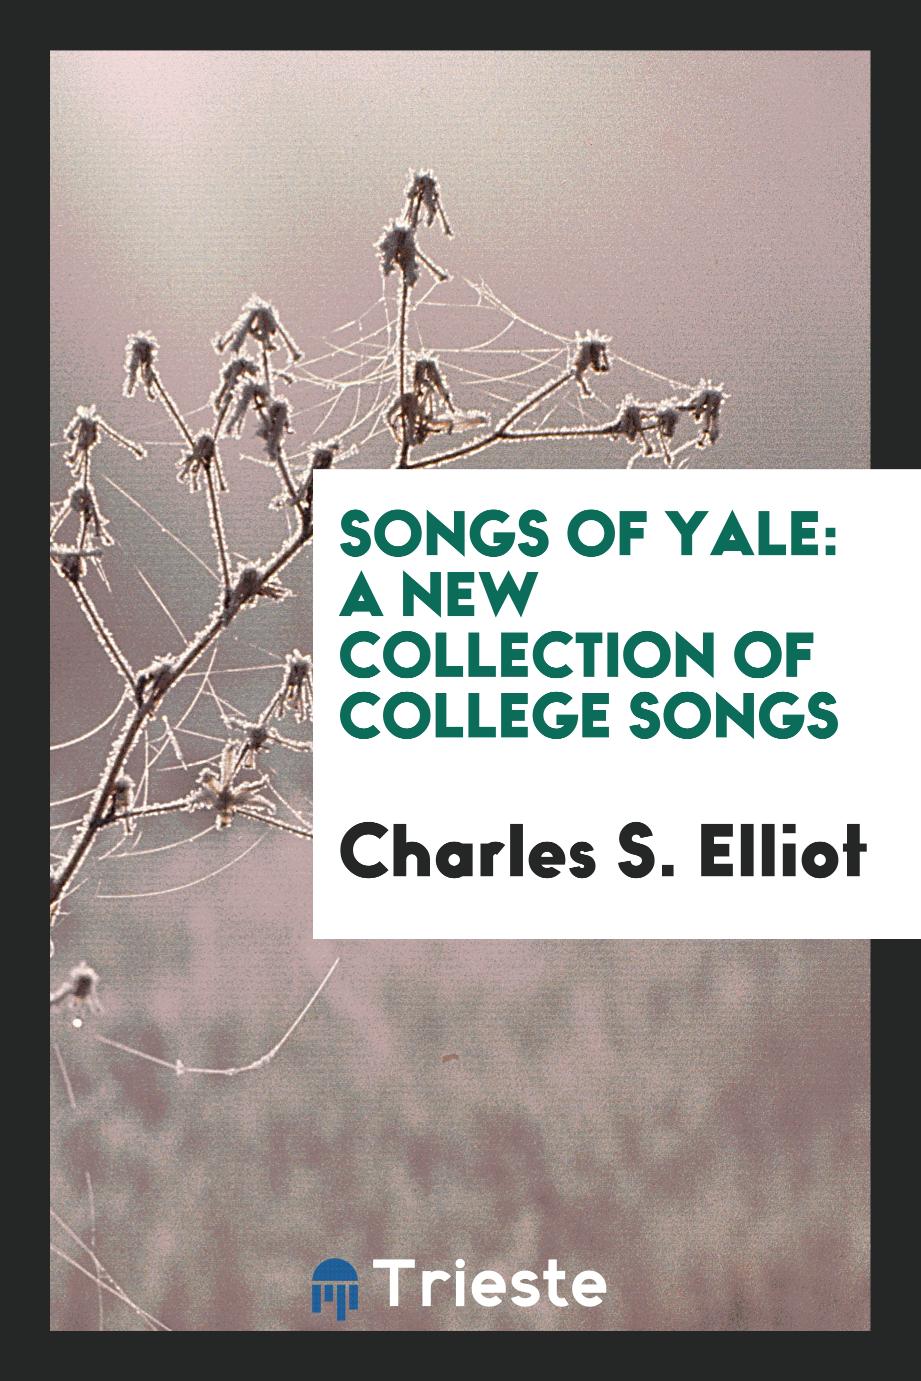 Songs of Yale: A New Collection of College Songs